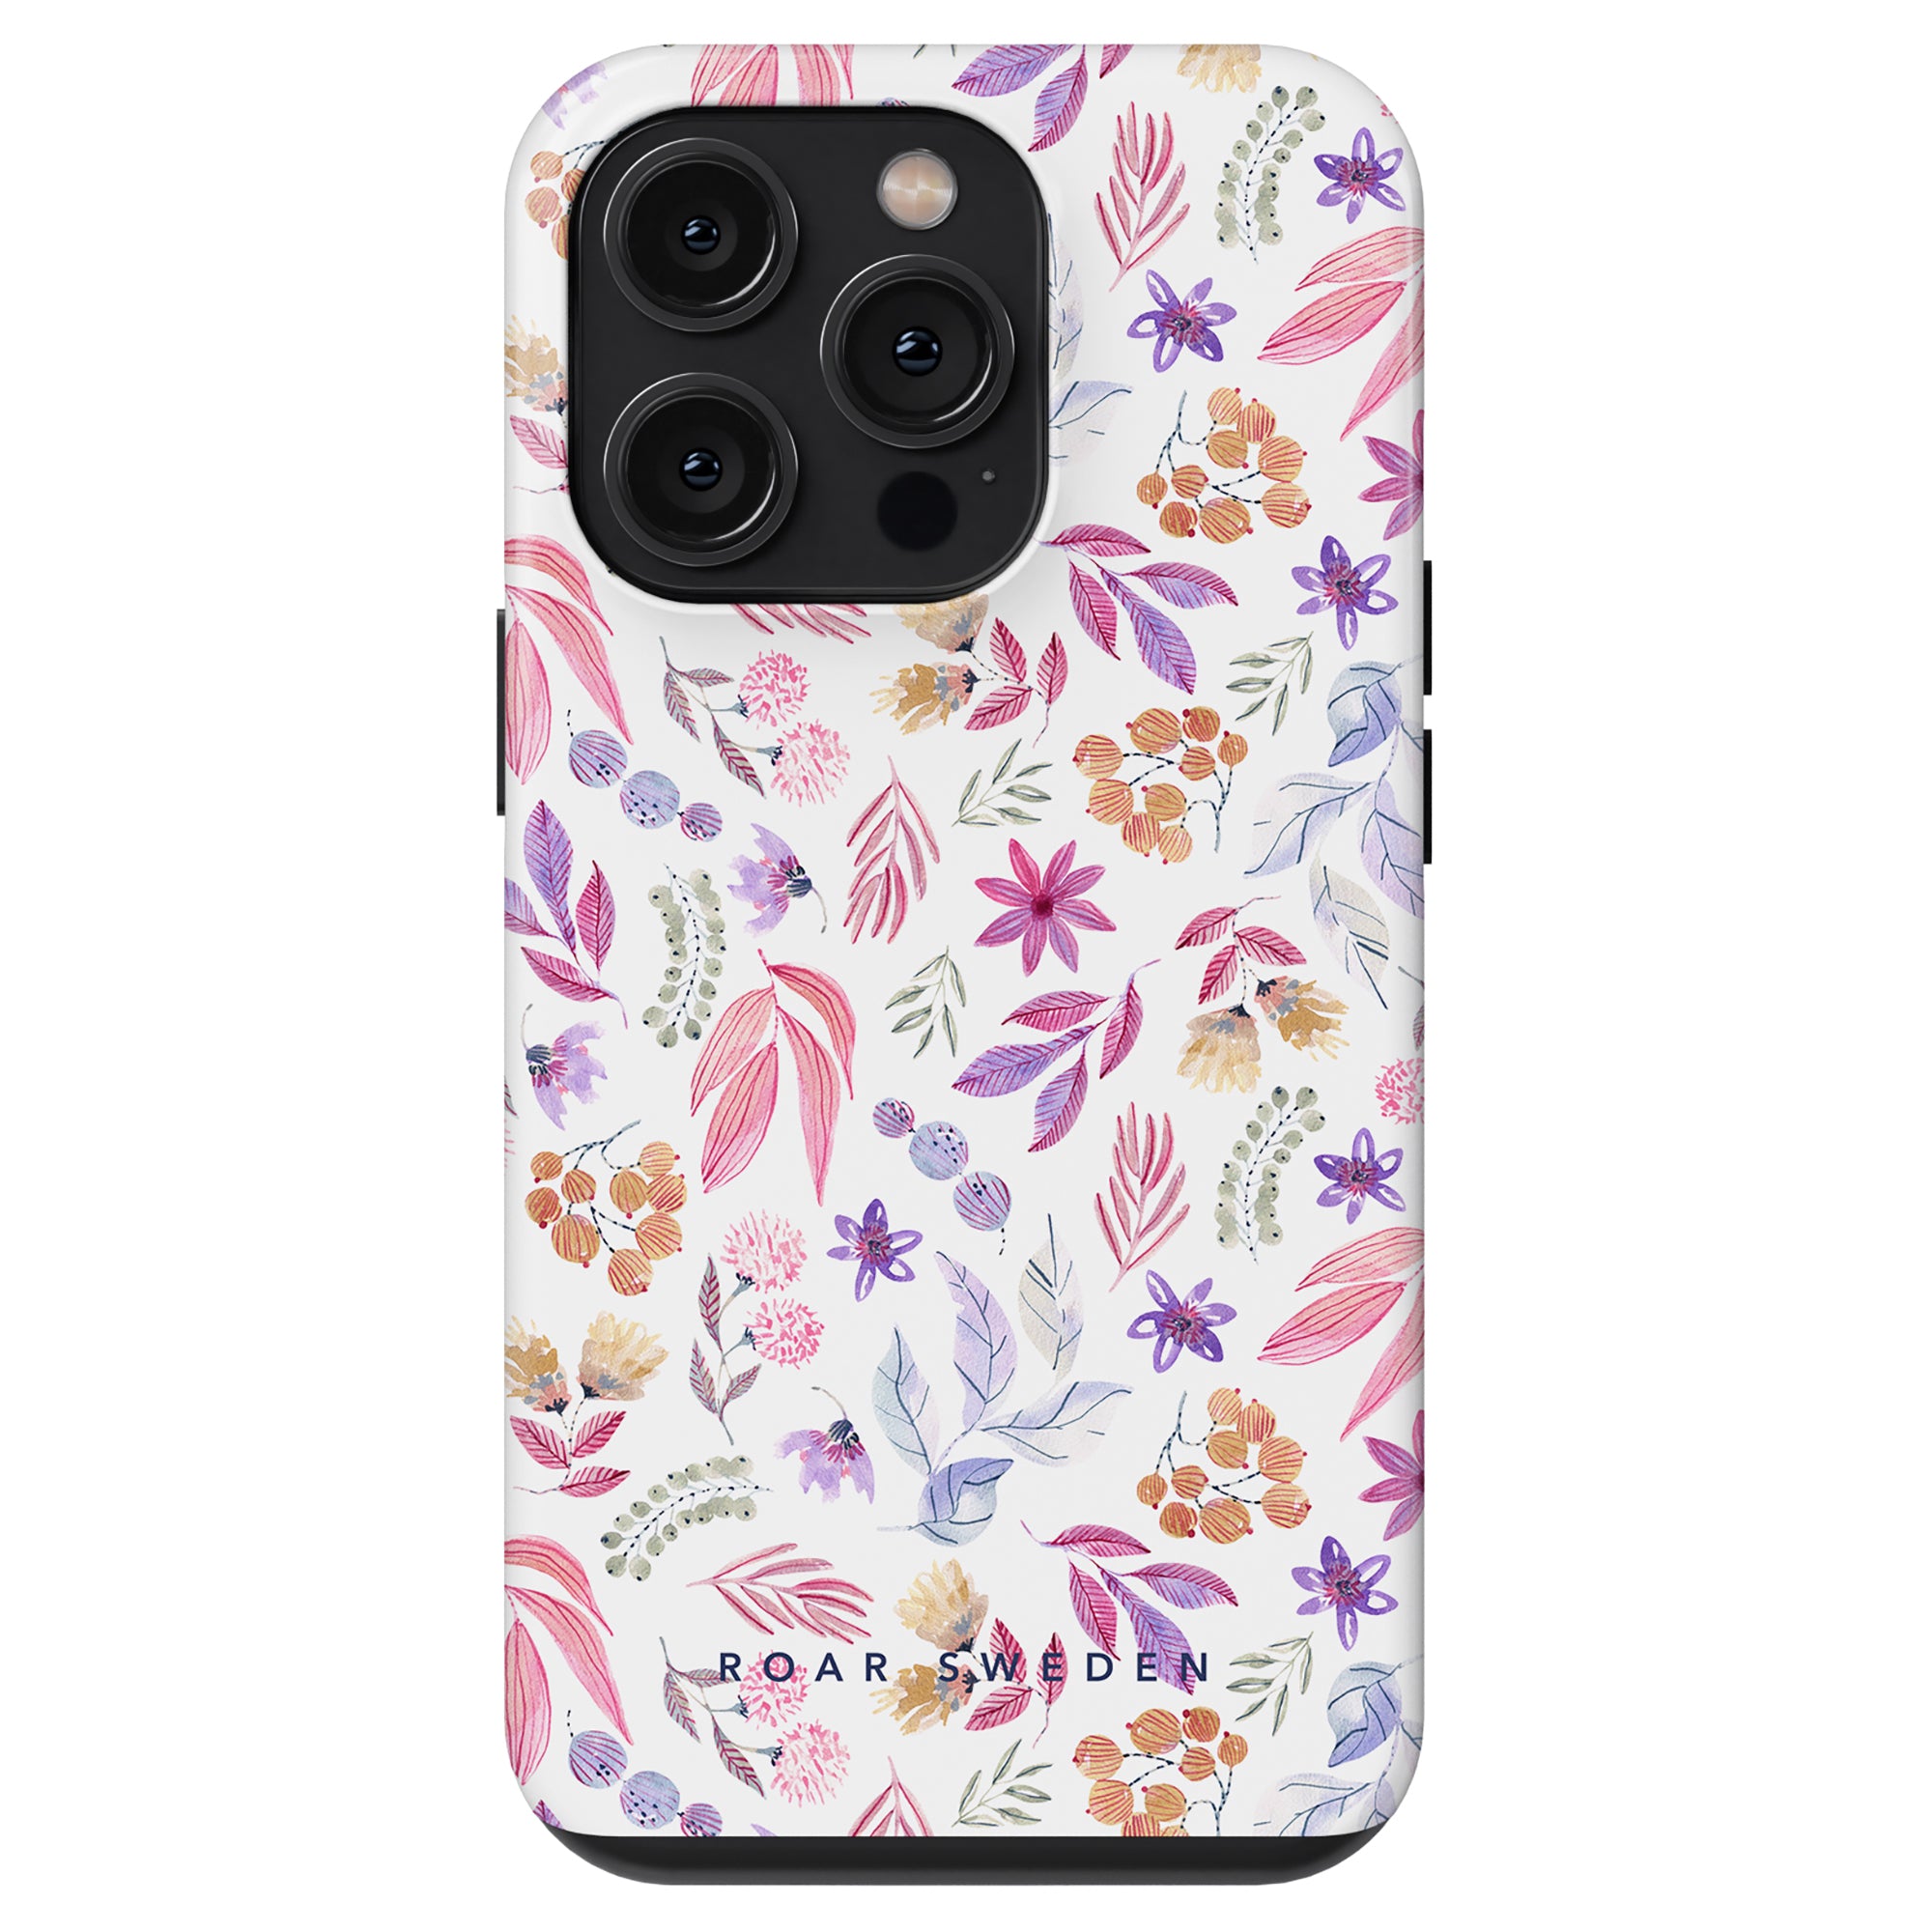 A smartphone with a case displaying a colorful floral pattern featuring pink, purple, and orange flowers, branded "Roar Sweden" at the bottom. Part of the Floral Collection, this Flower Power - Tough Case offers maximalt skydd for your device.